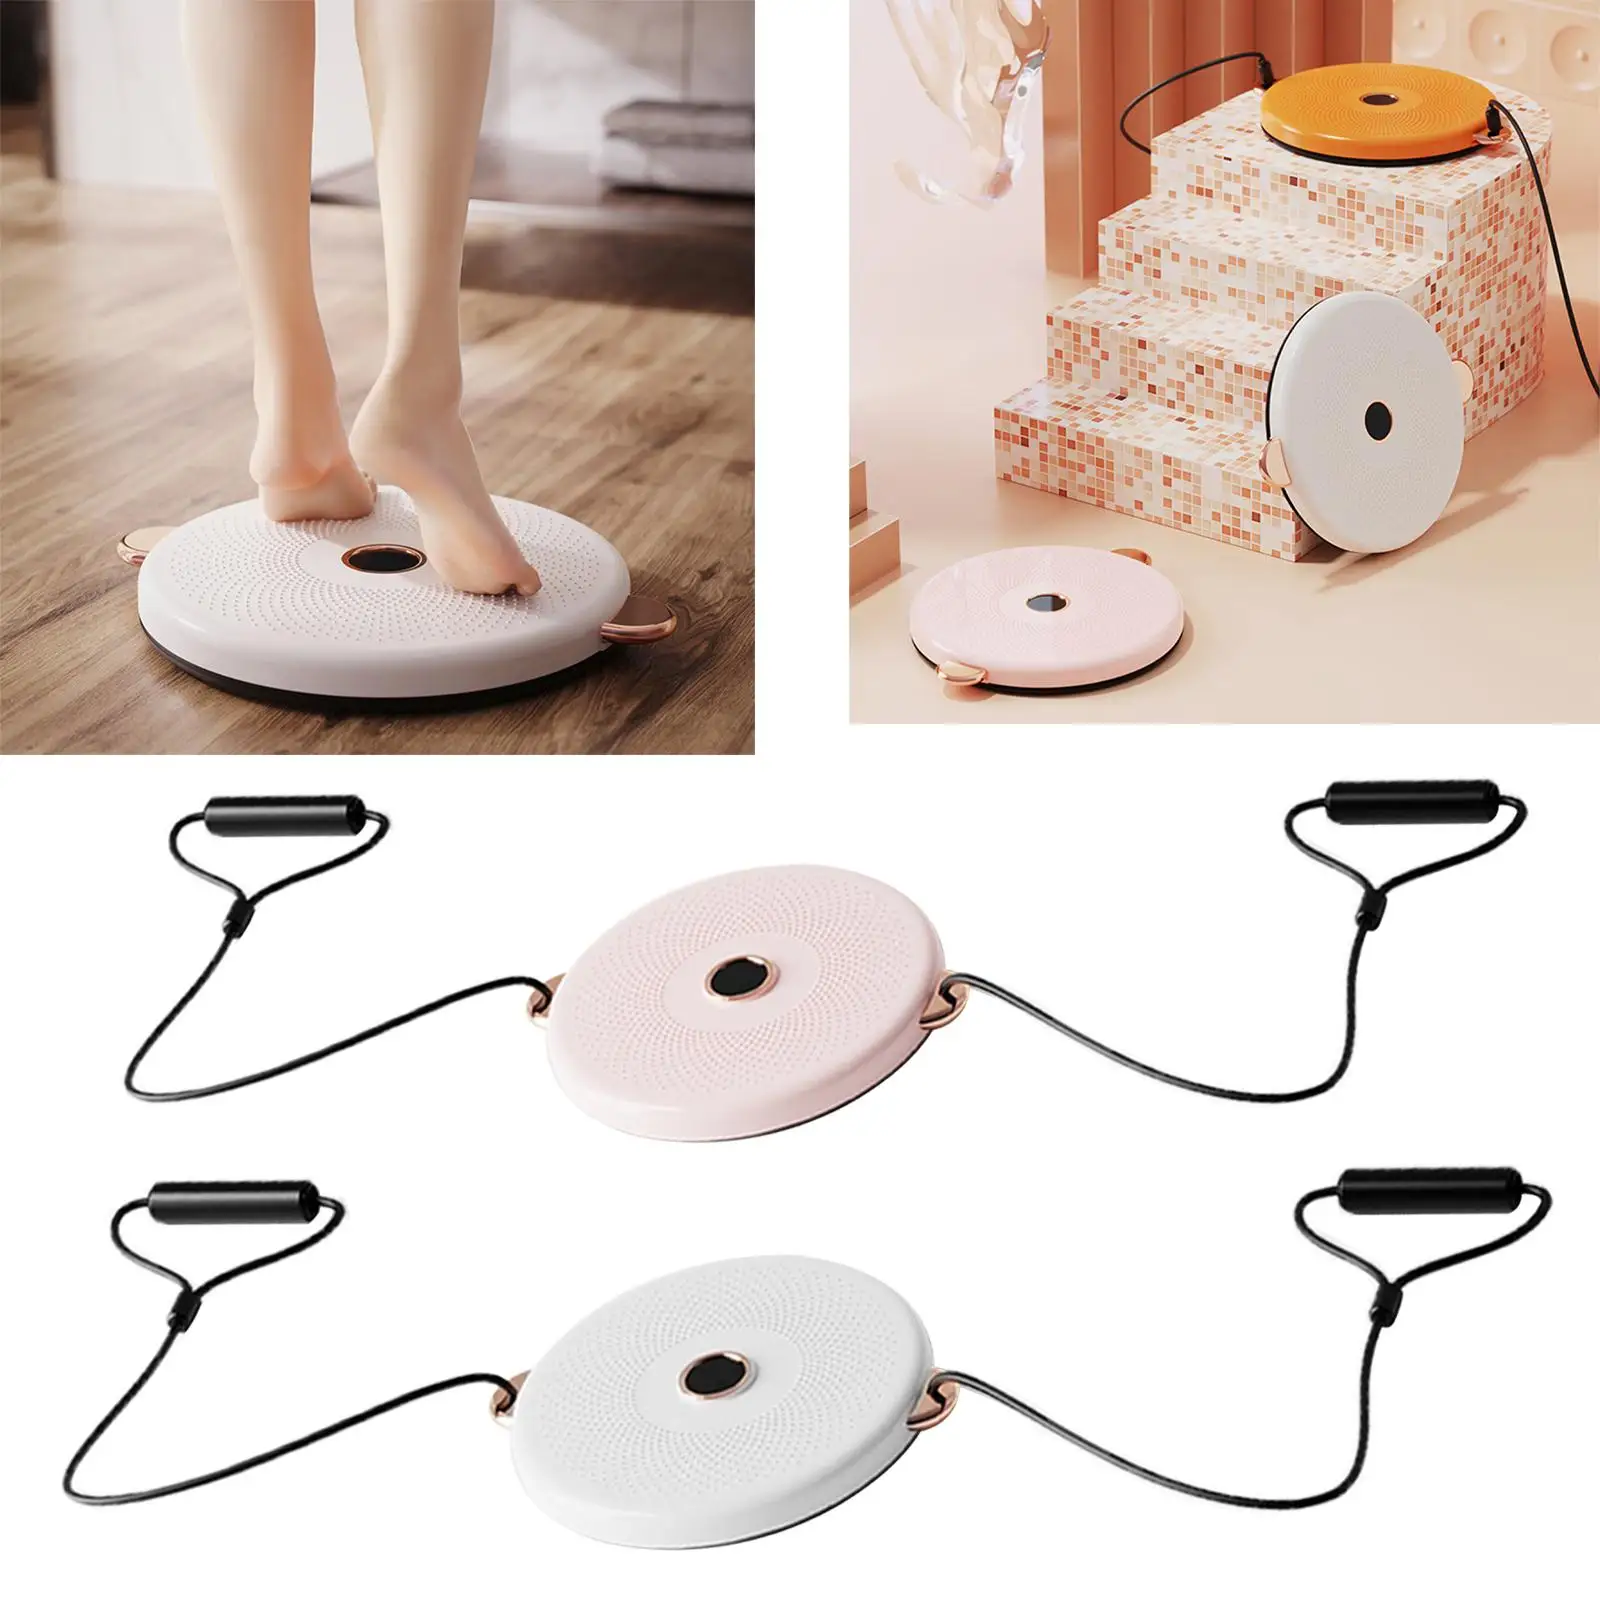 Twist Exercise Board Waist Twisting Disc Sports Equipment for Body Sculpting